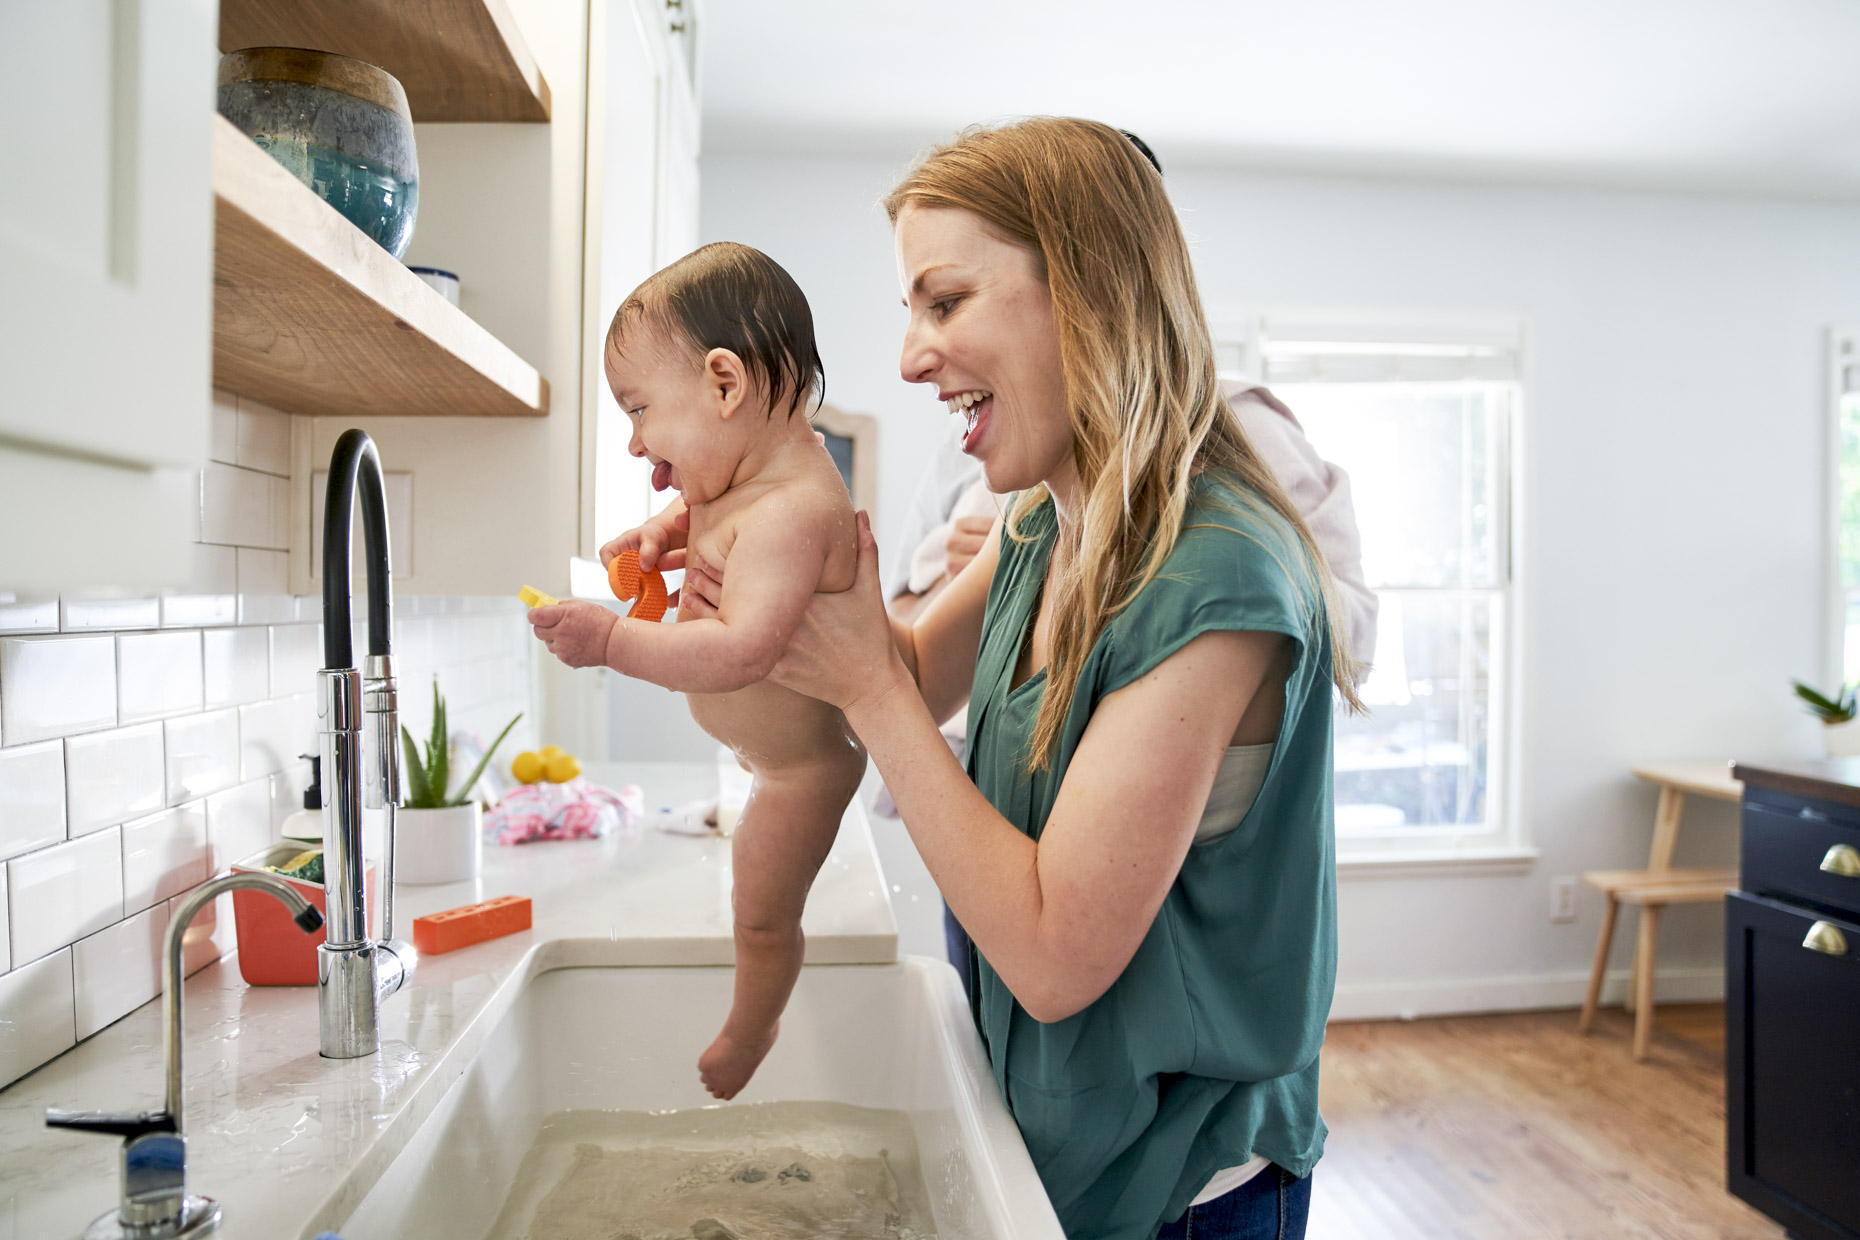 Happy mom lifting baby out of kitchen sink bath